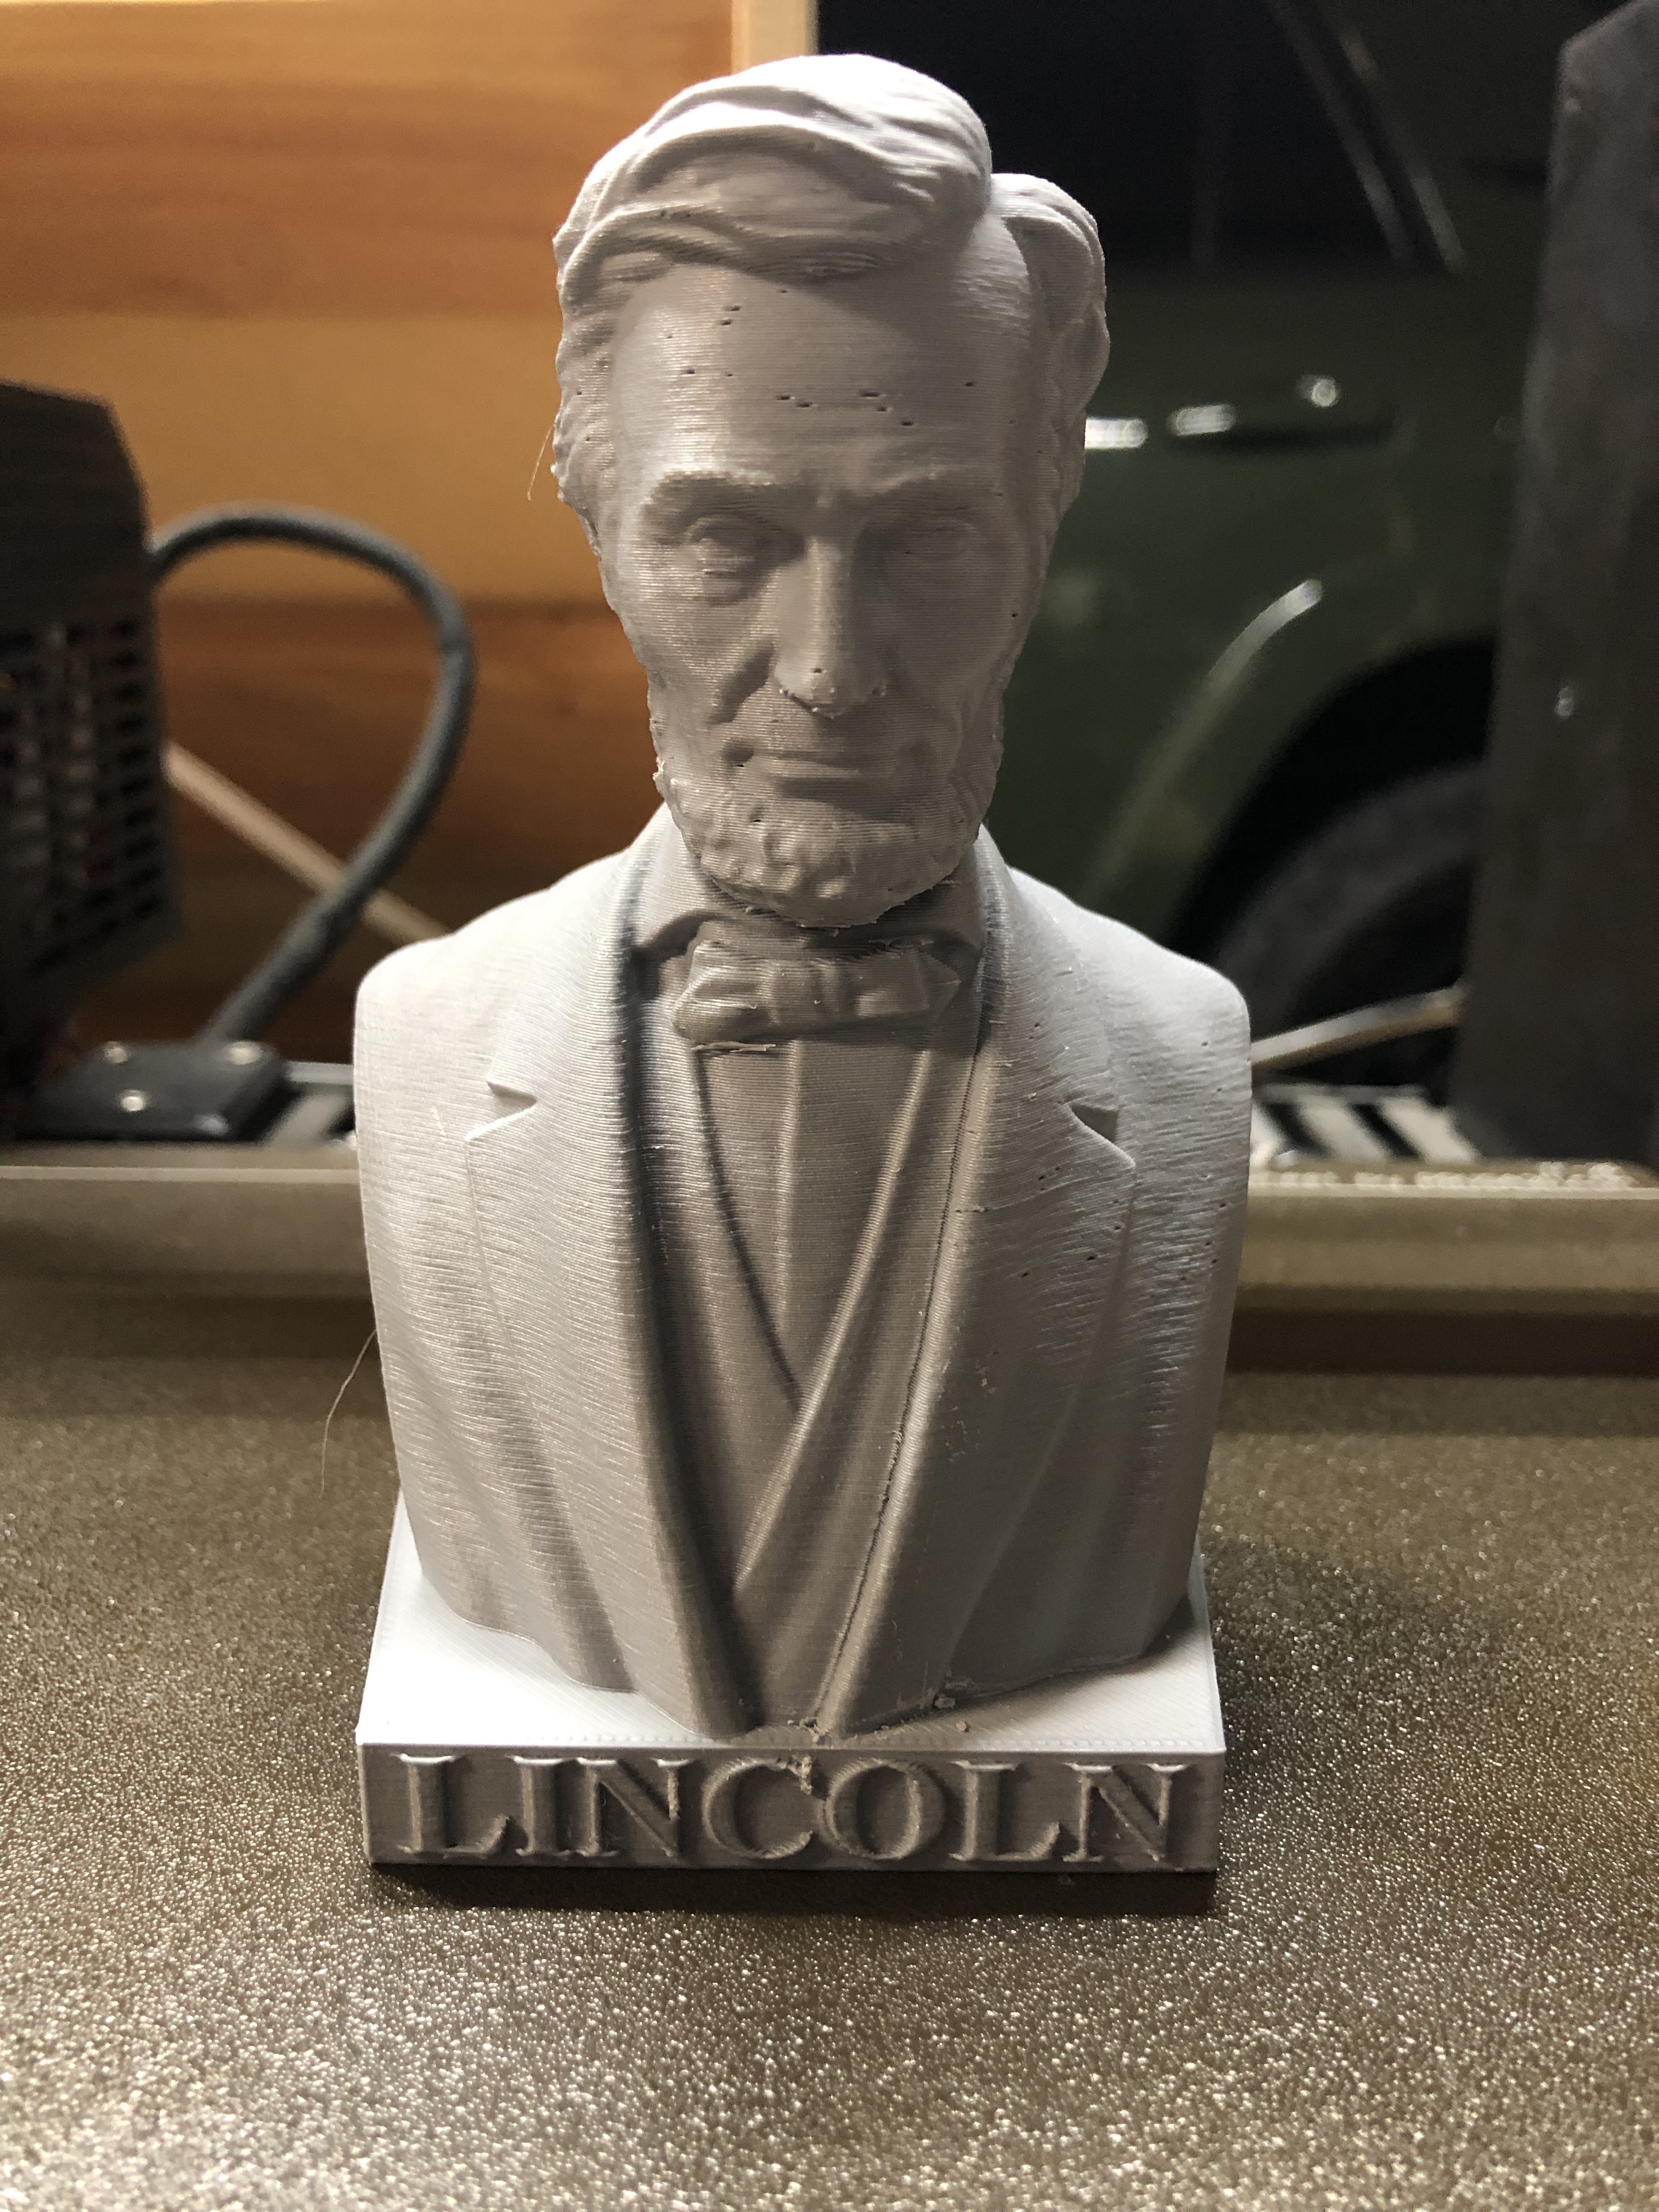 Abe Lincoln Bust w/name on base.